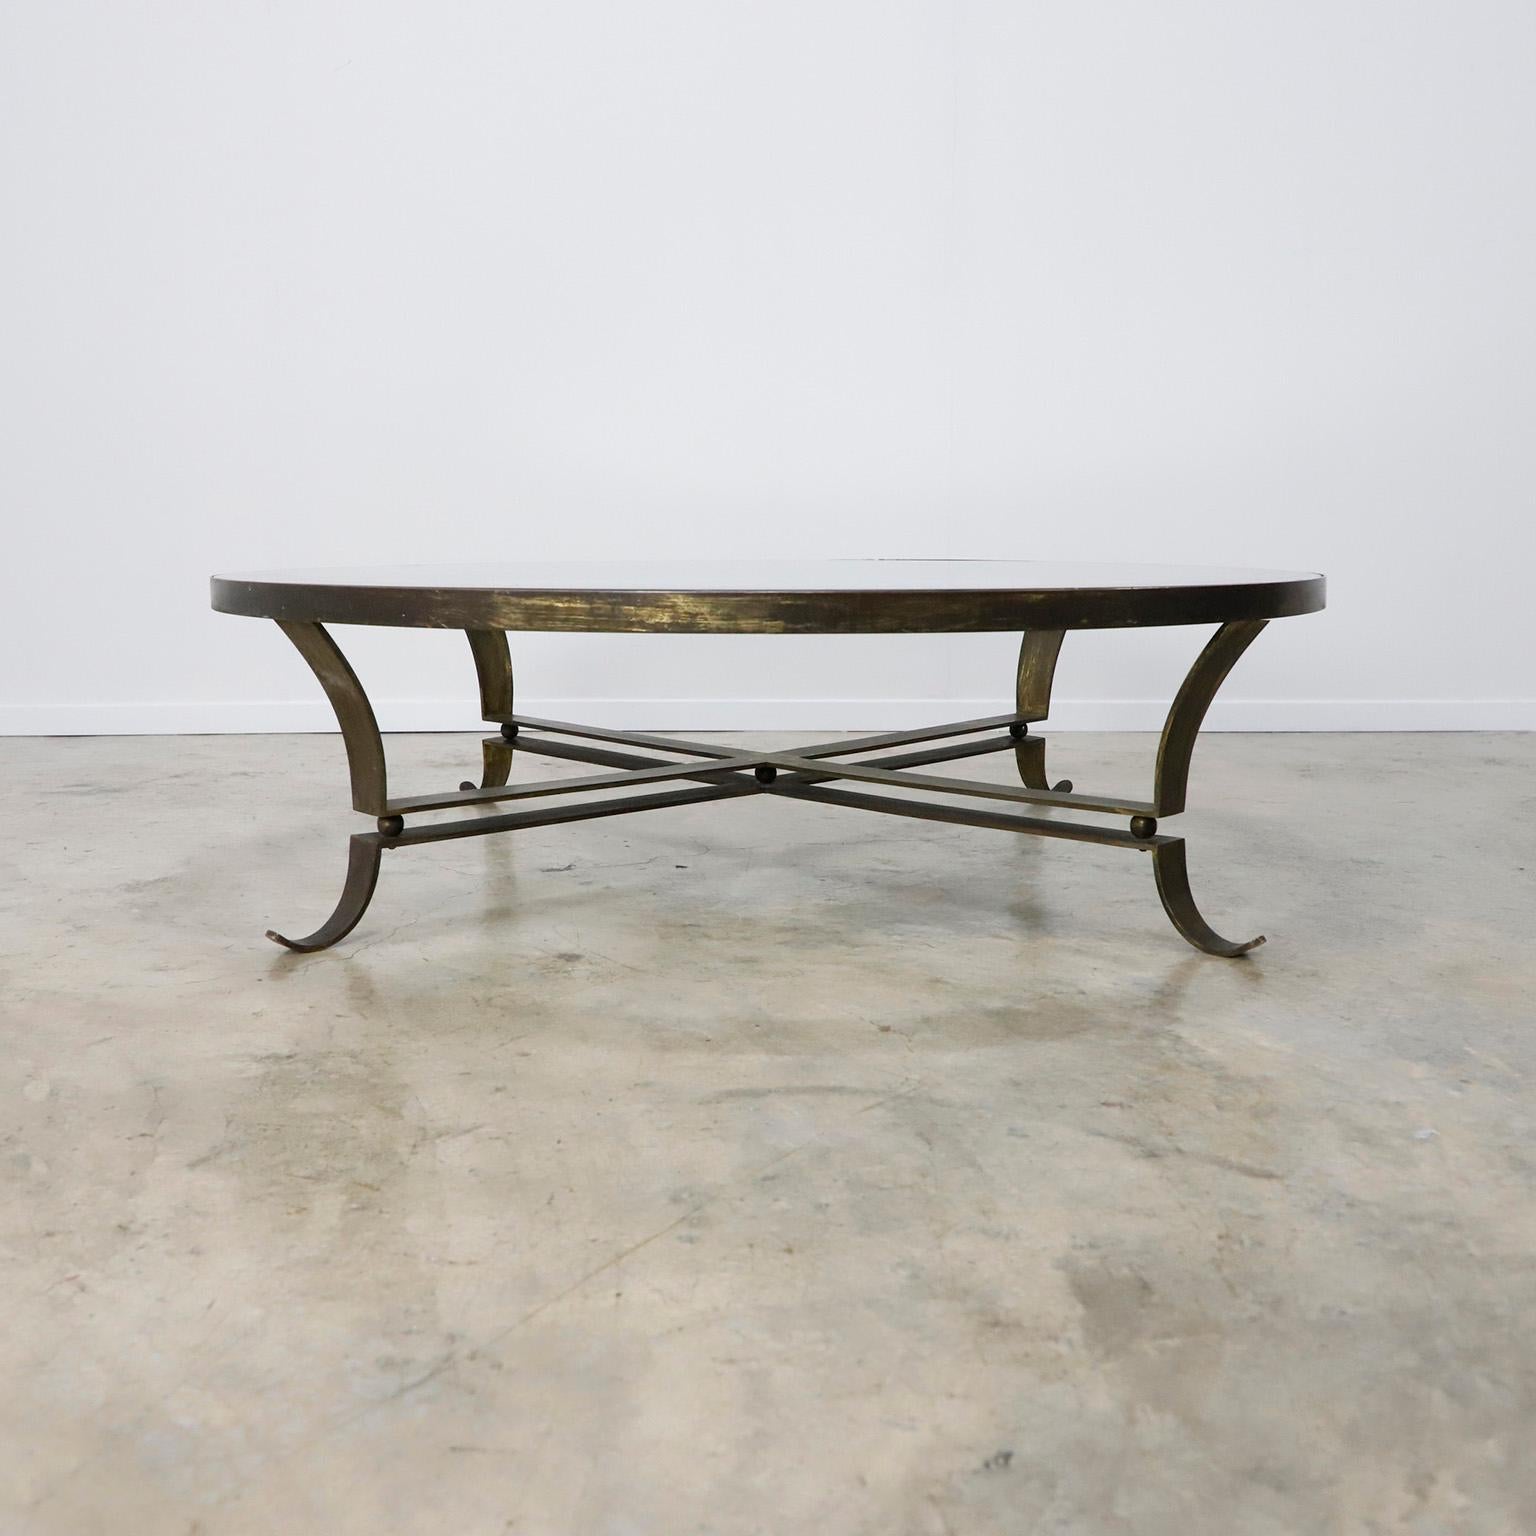 Made in Mexico, circa 1950s, designed by Arturo Pani, the table has original mirror glass and solid brass base.